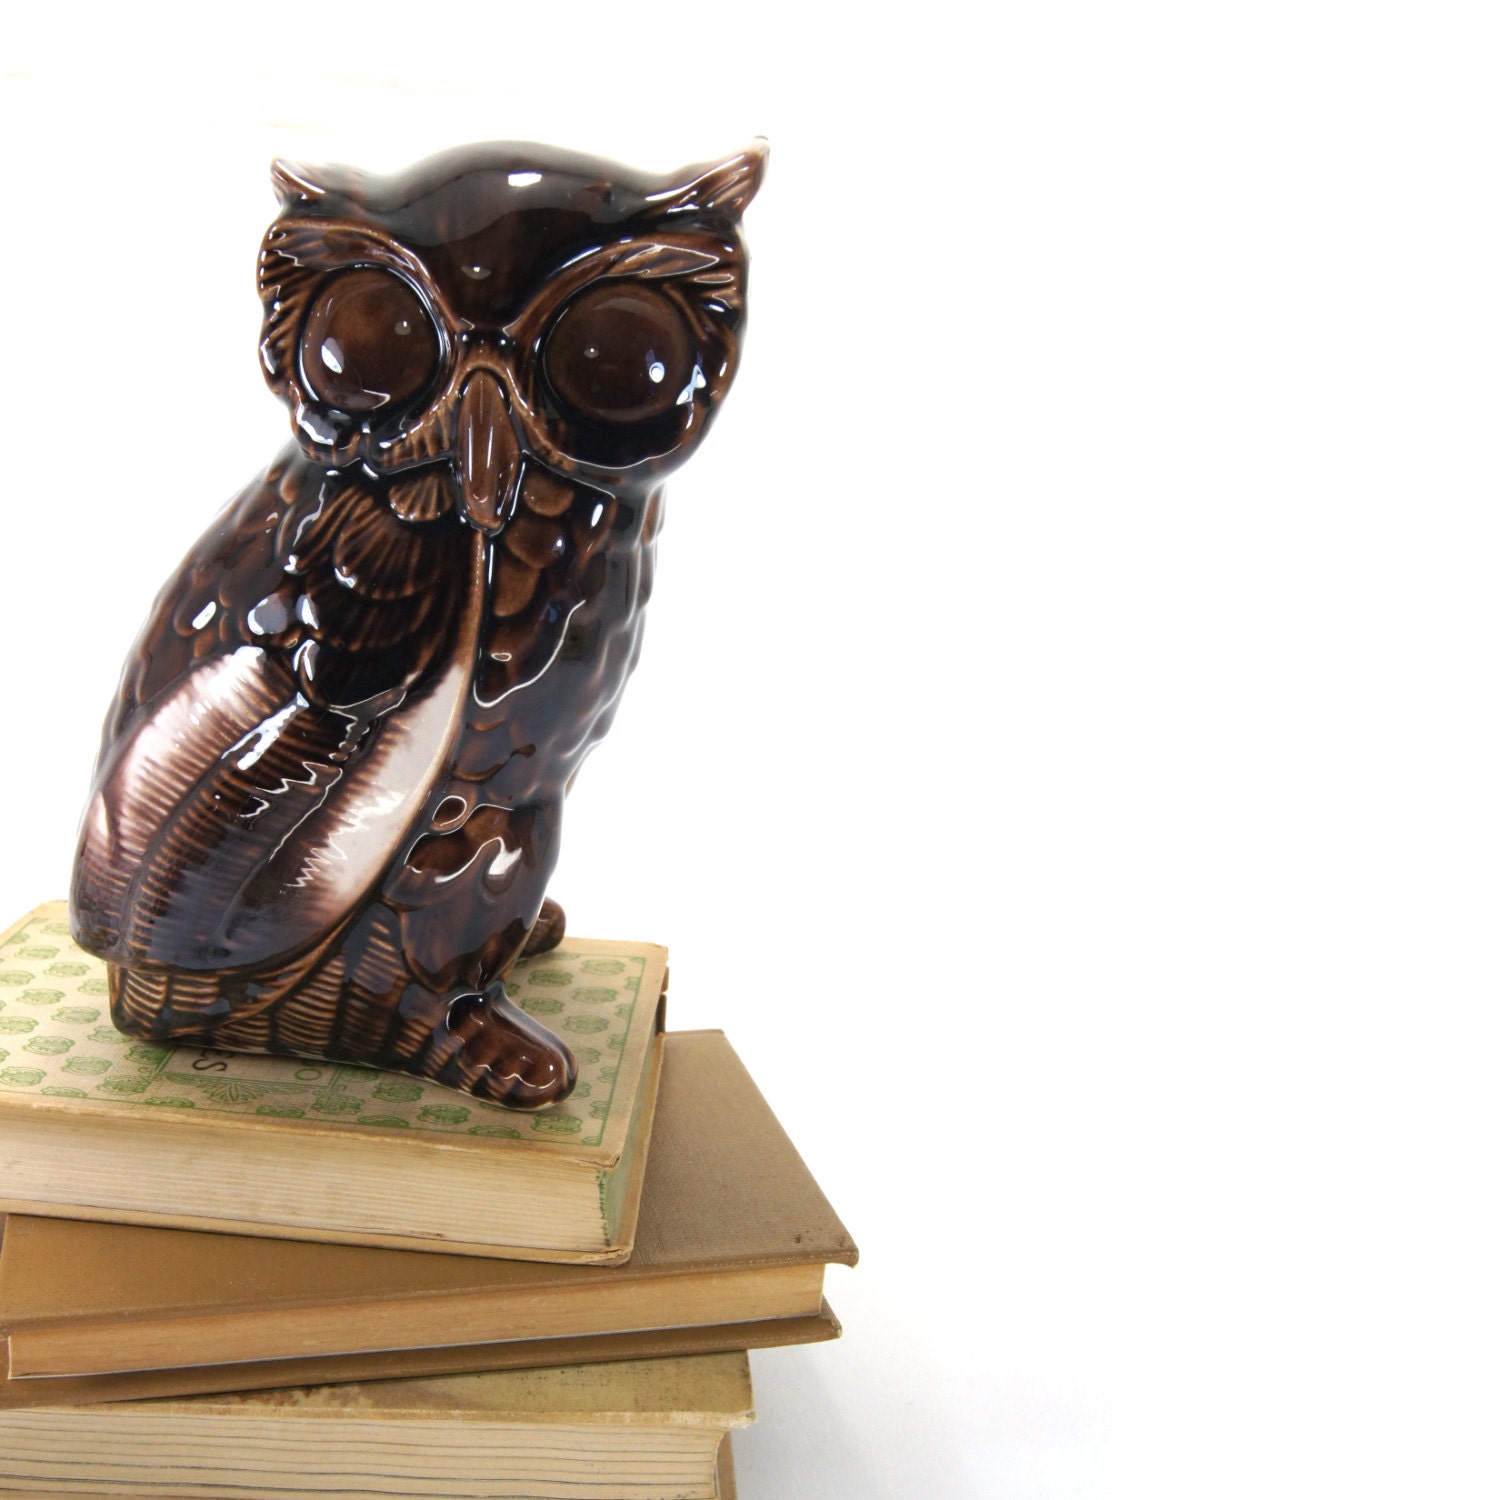 Vintage ceramic owl - Rustic home decor - Woodland - Ivory and brown large owl figurine - ClassicByNature